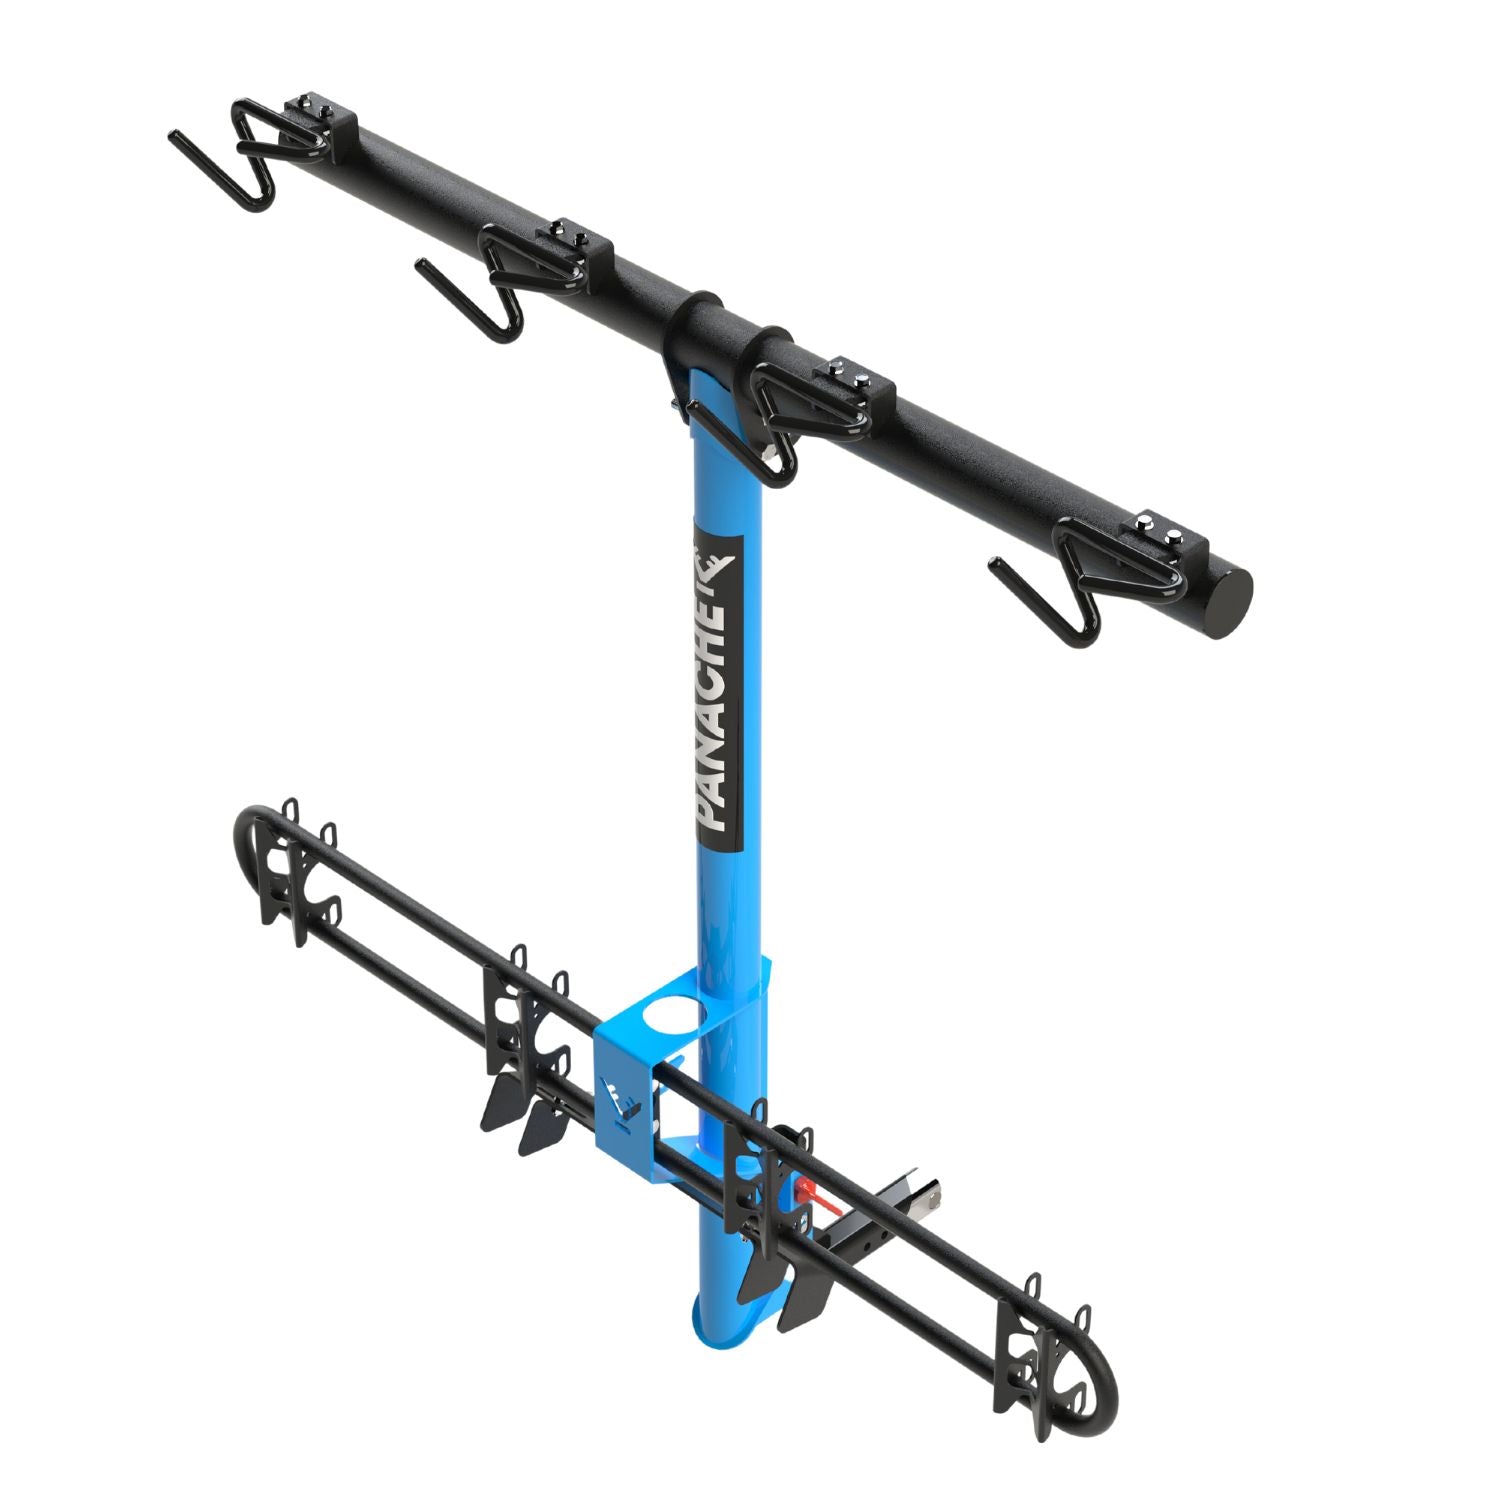 T4 IMPERFECT vertical bike rack for 2 inch hitch - BLUE